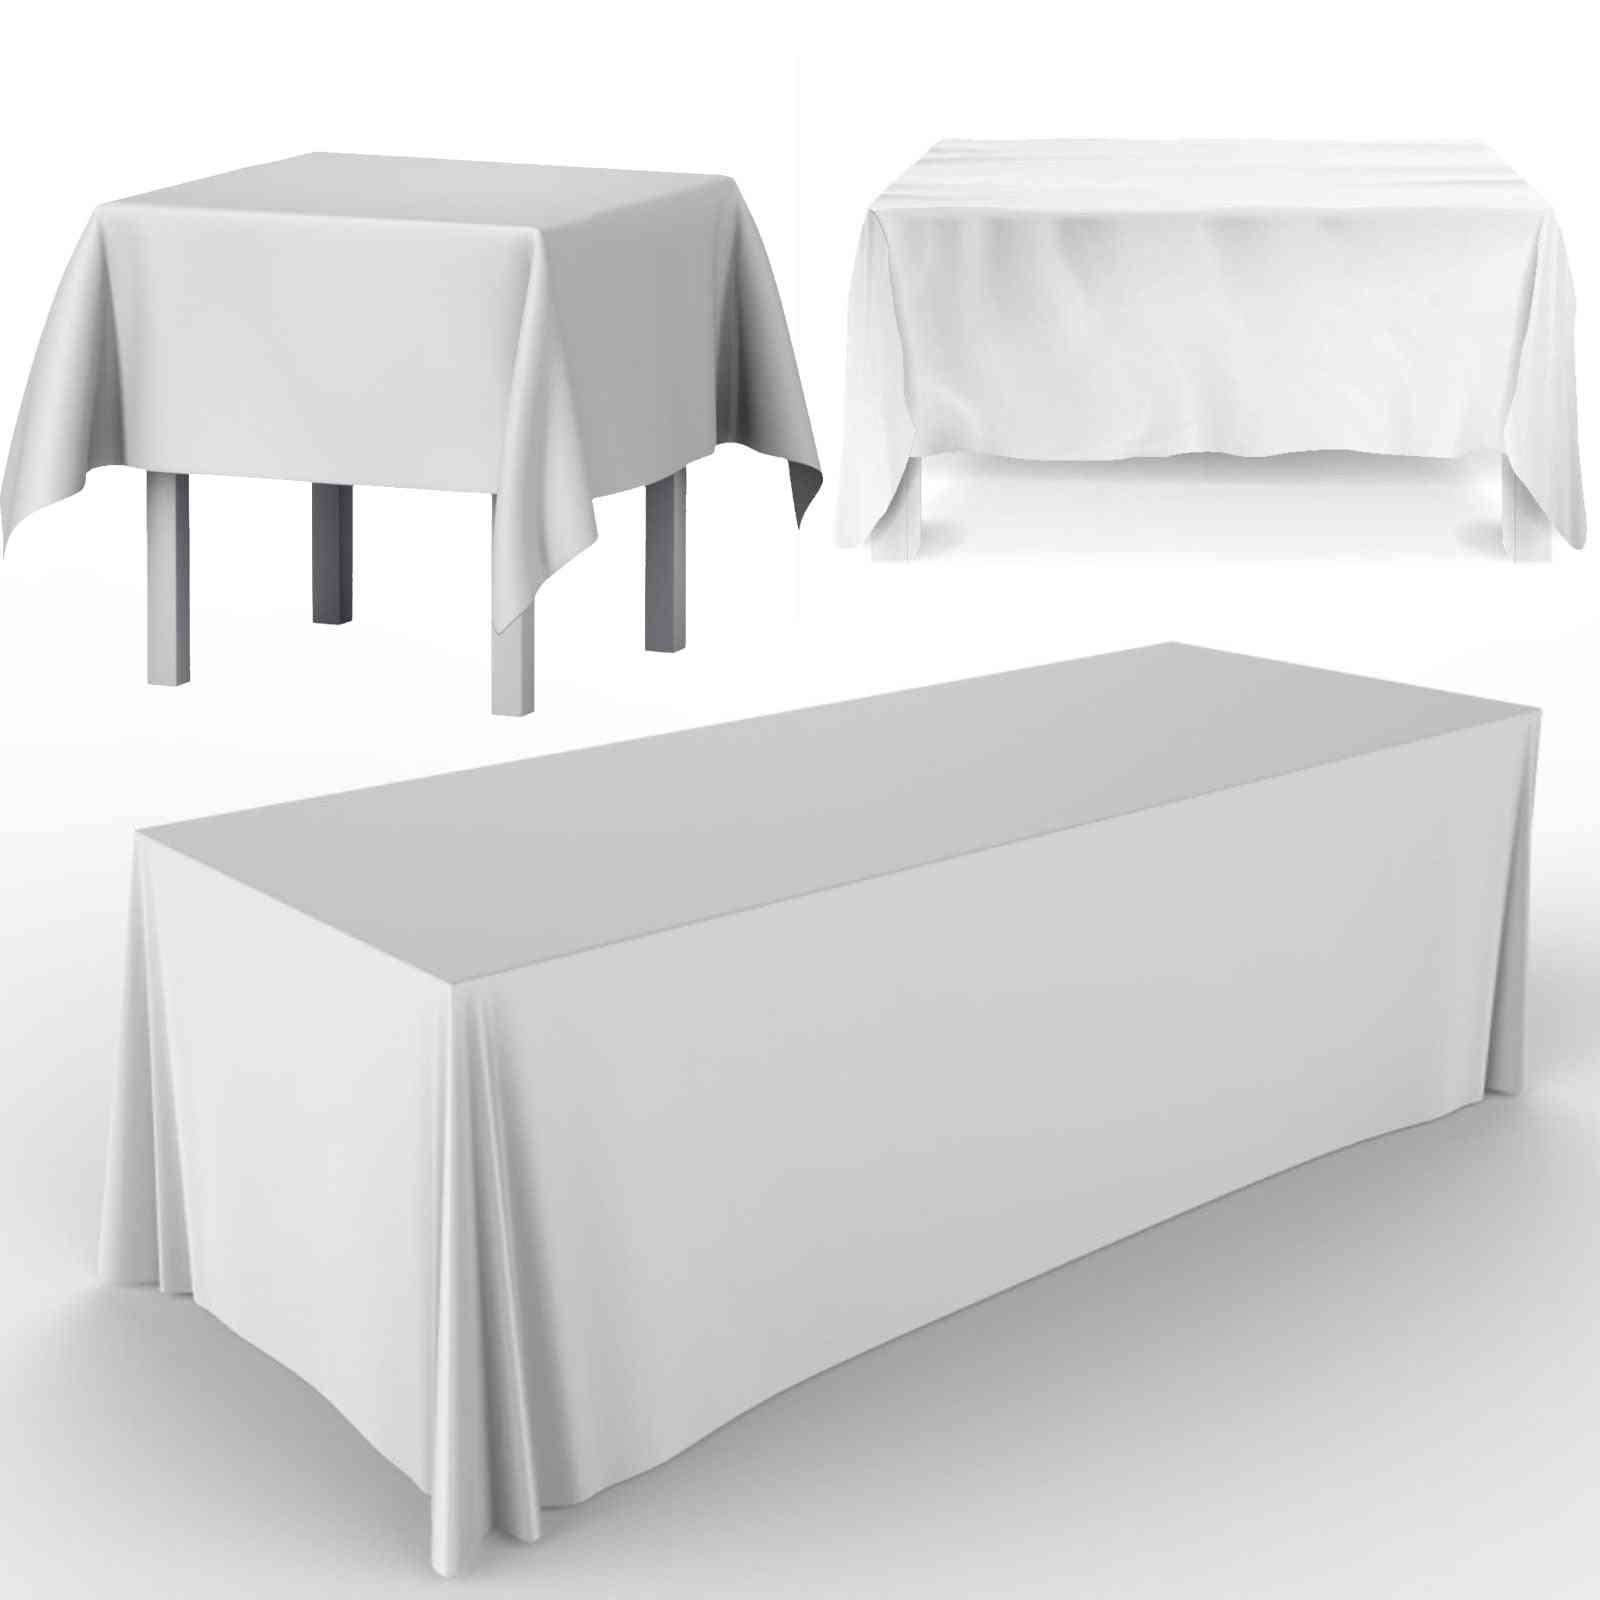 Rectangle Satin Tablecloth. Dining Table Cover